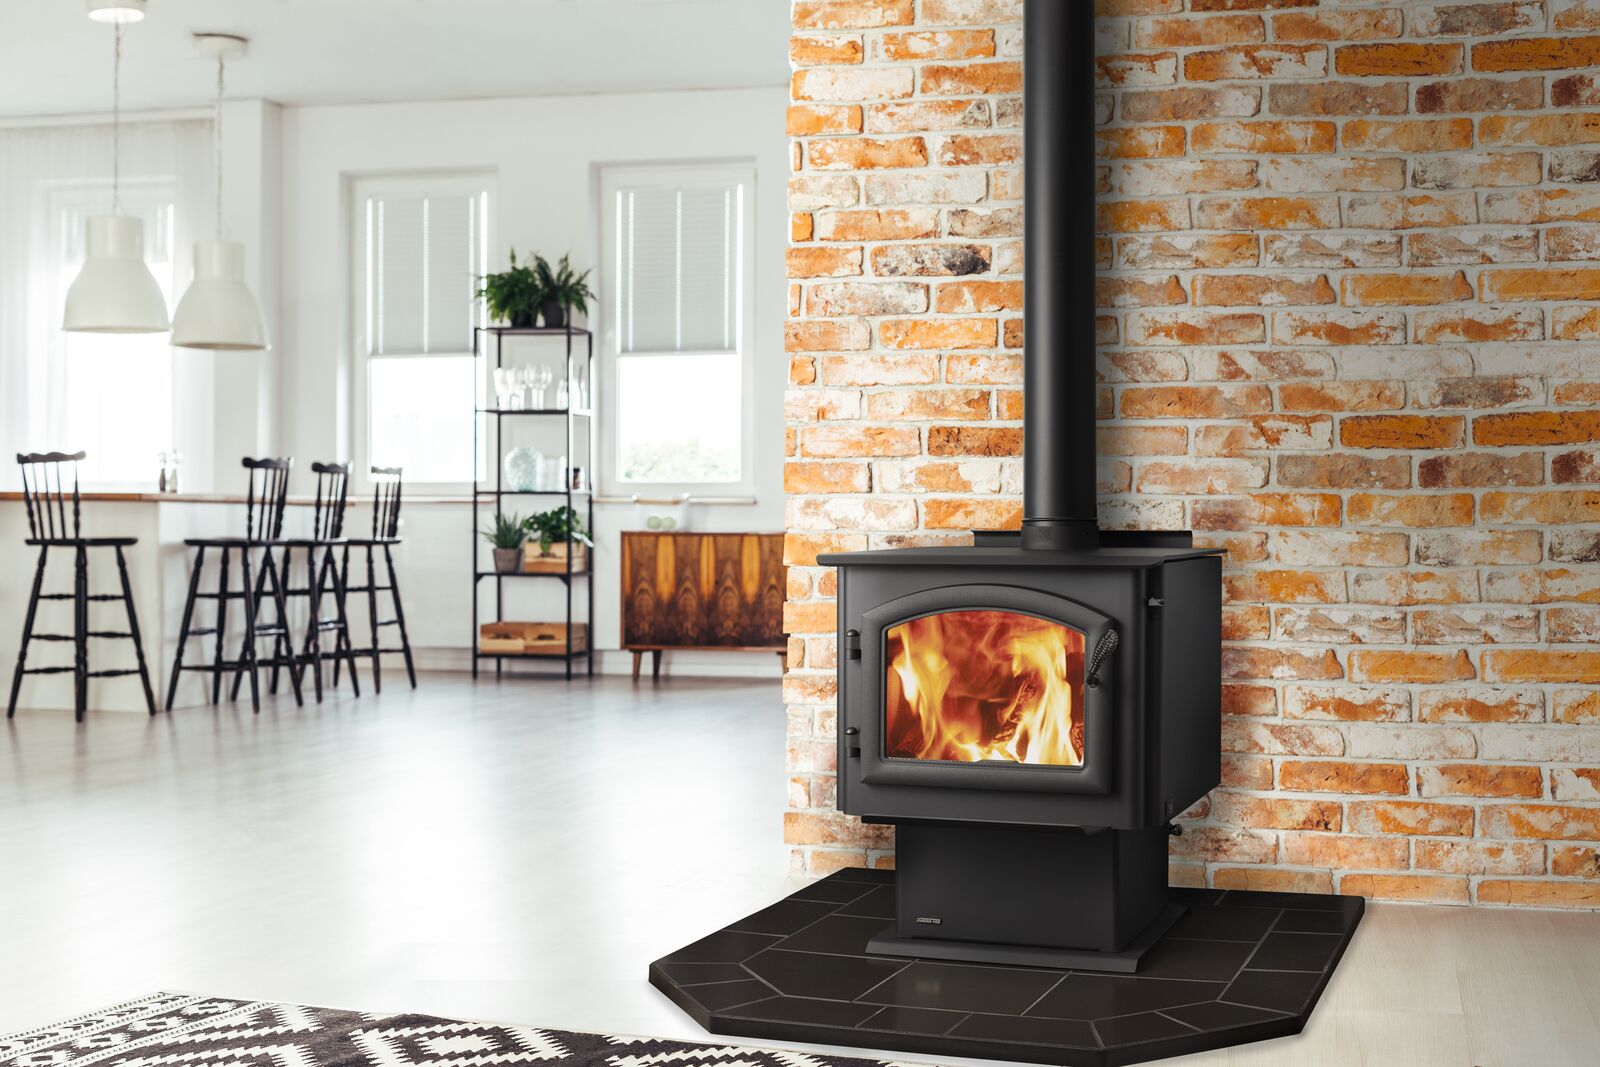 A modern wood-burning stove set against a brick wall in a bright, open-concept living area with contemporary furniture and decor.